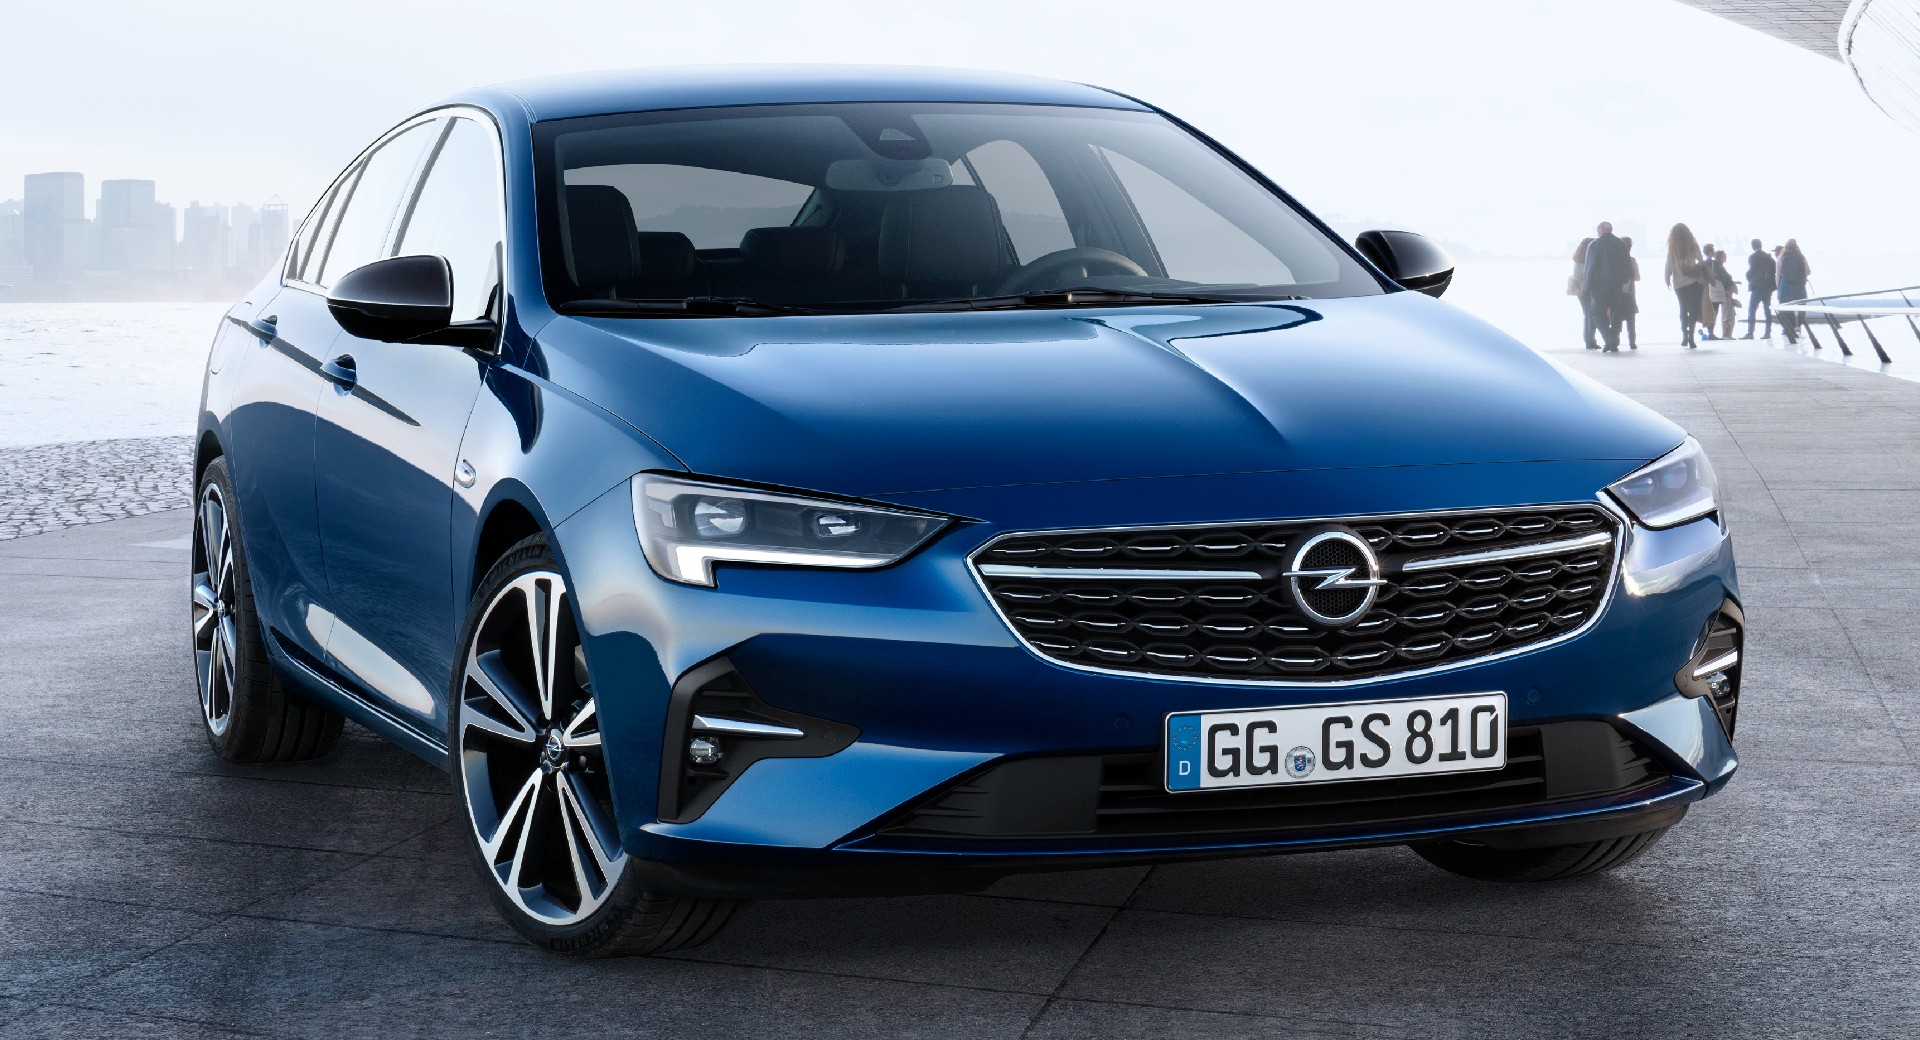 Opel Insignia to be axed following the retirement of its Vauxhall twin